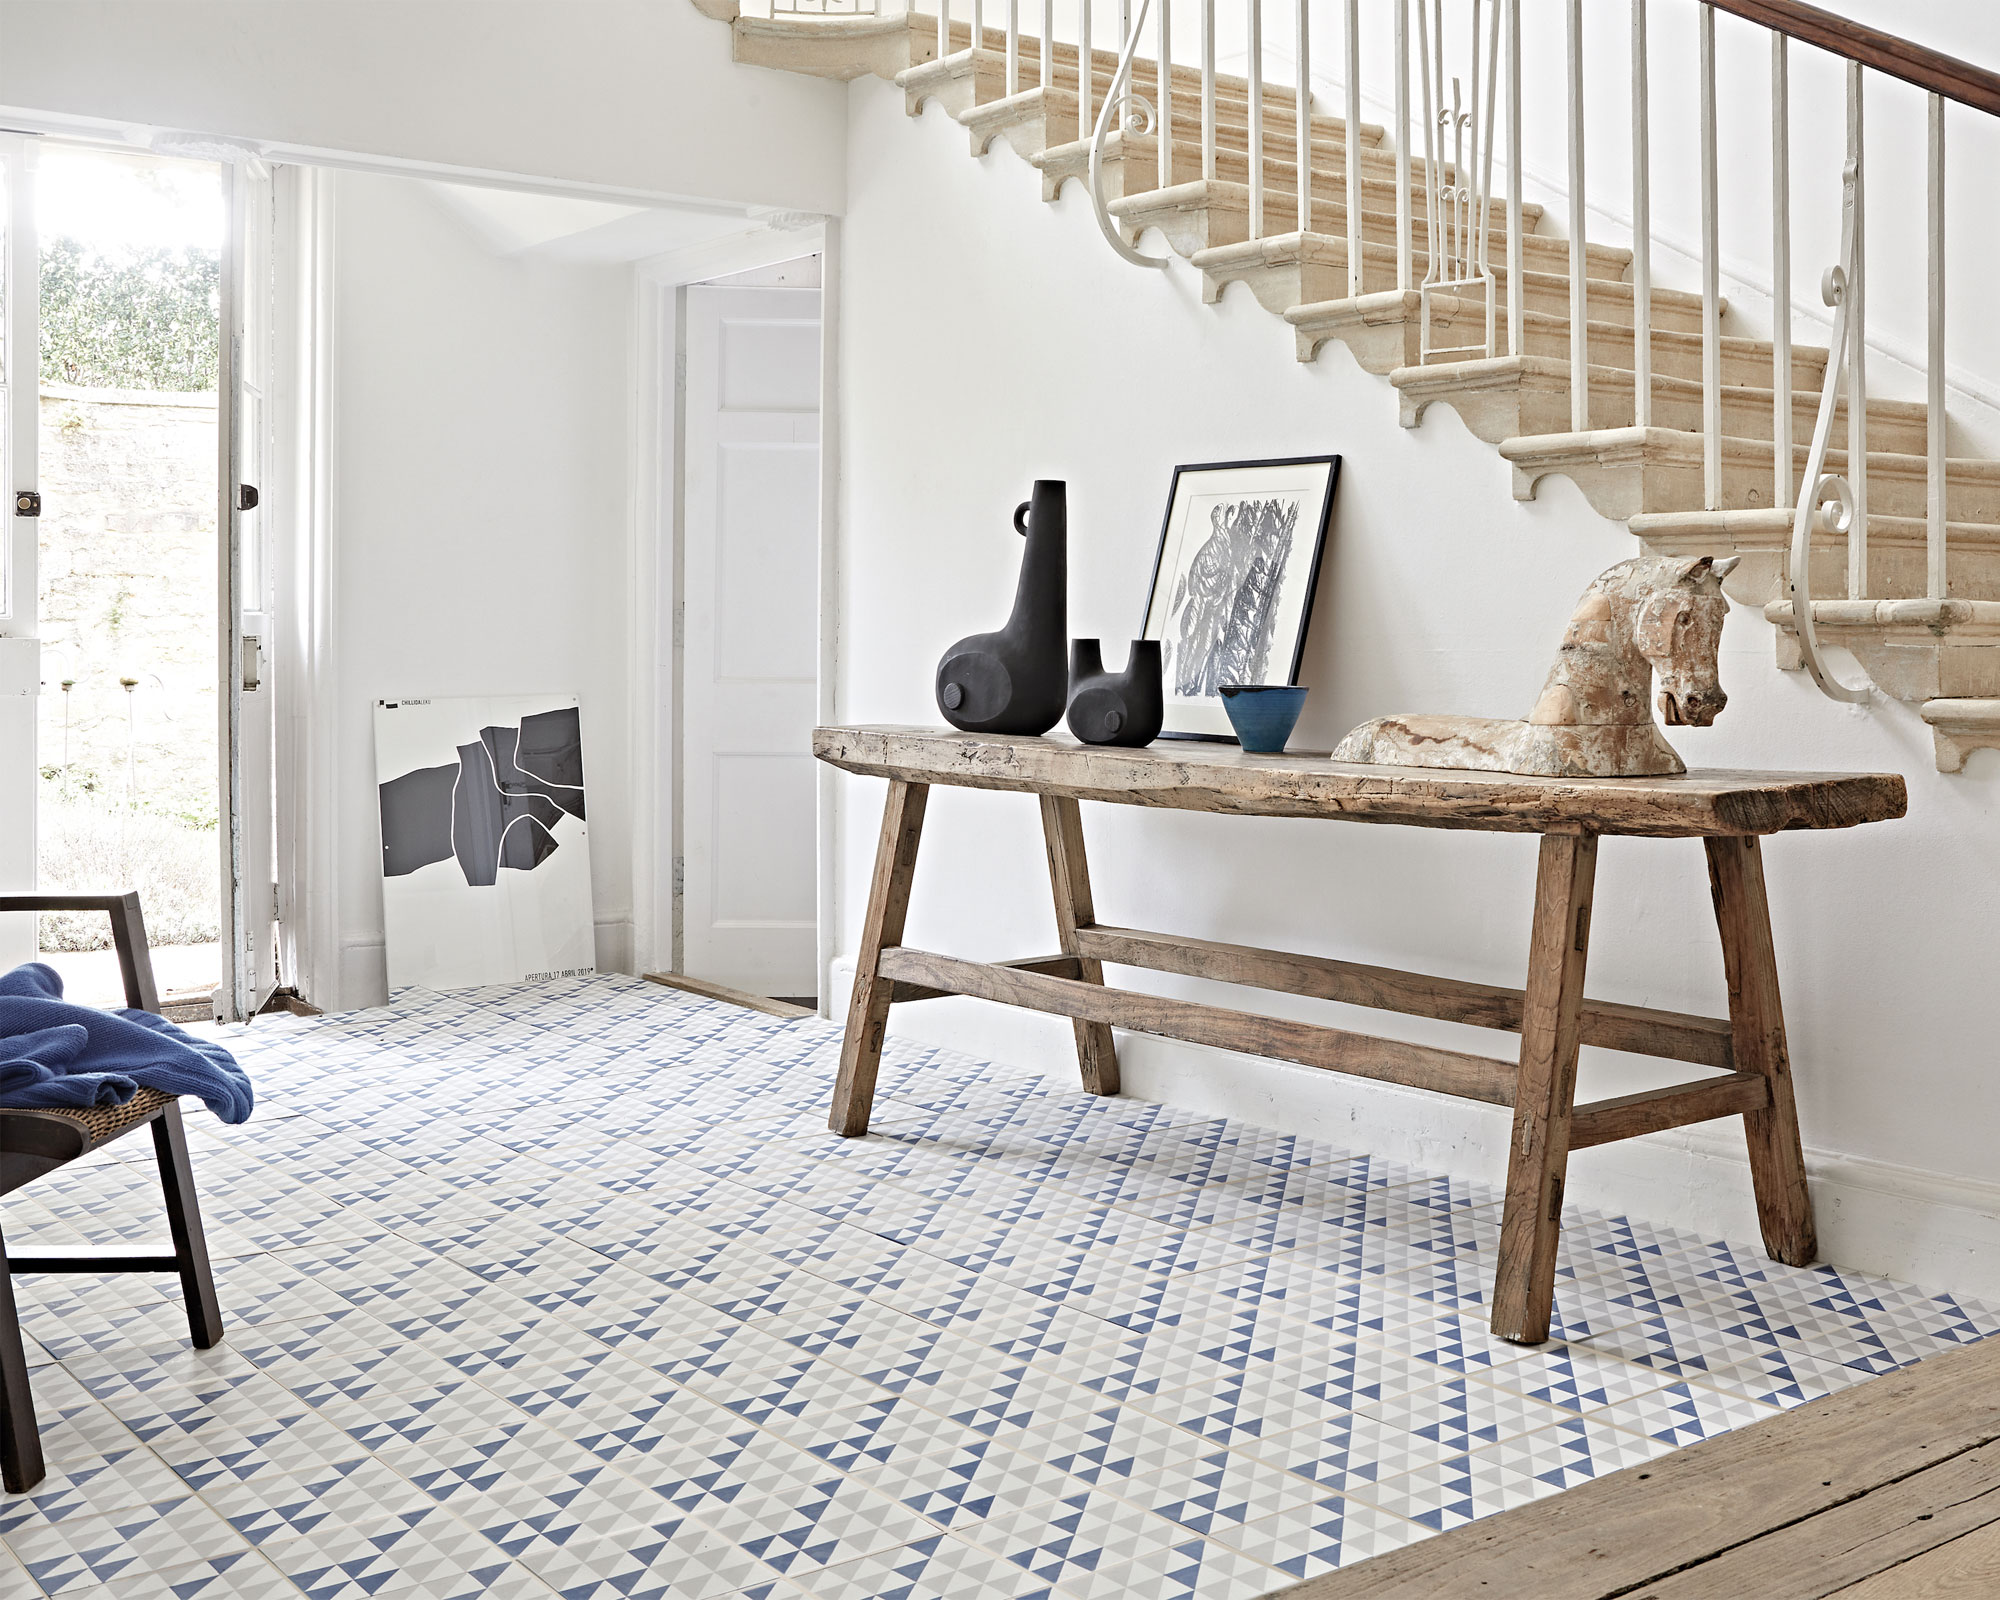 Country-cottage style hallway with large stone staircase, wooden flooring, lower level flooring in gray and blue geometric, triangle tiles, unique dark wooden console table decorated in objects, white painted walls